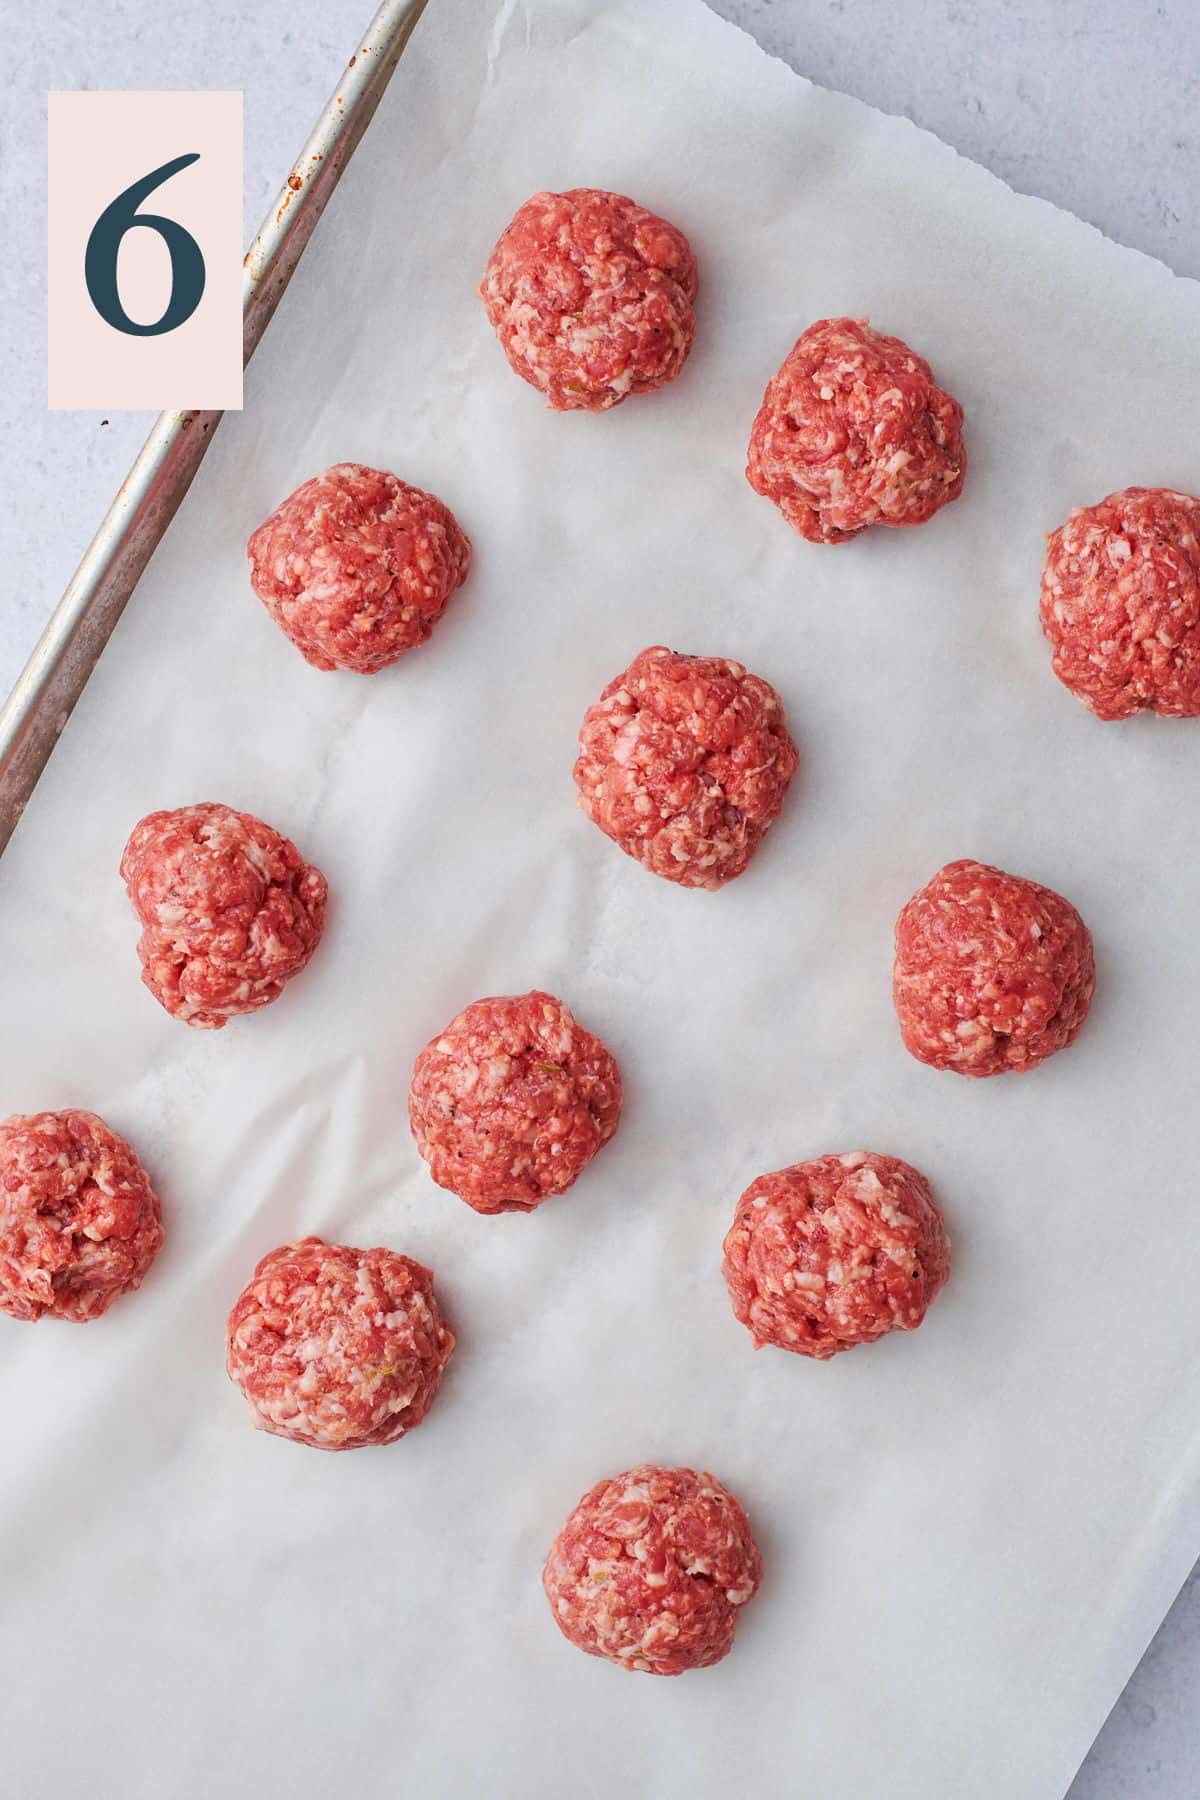 raw burger patties on a baking sheet lined with parchment.